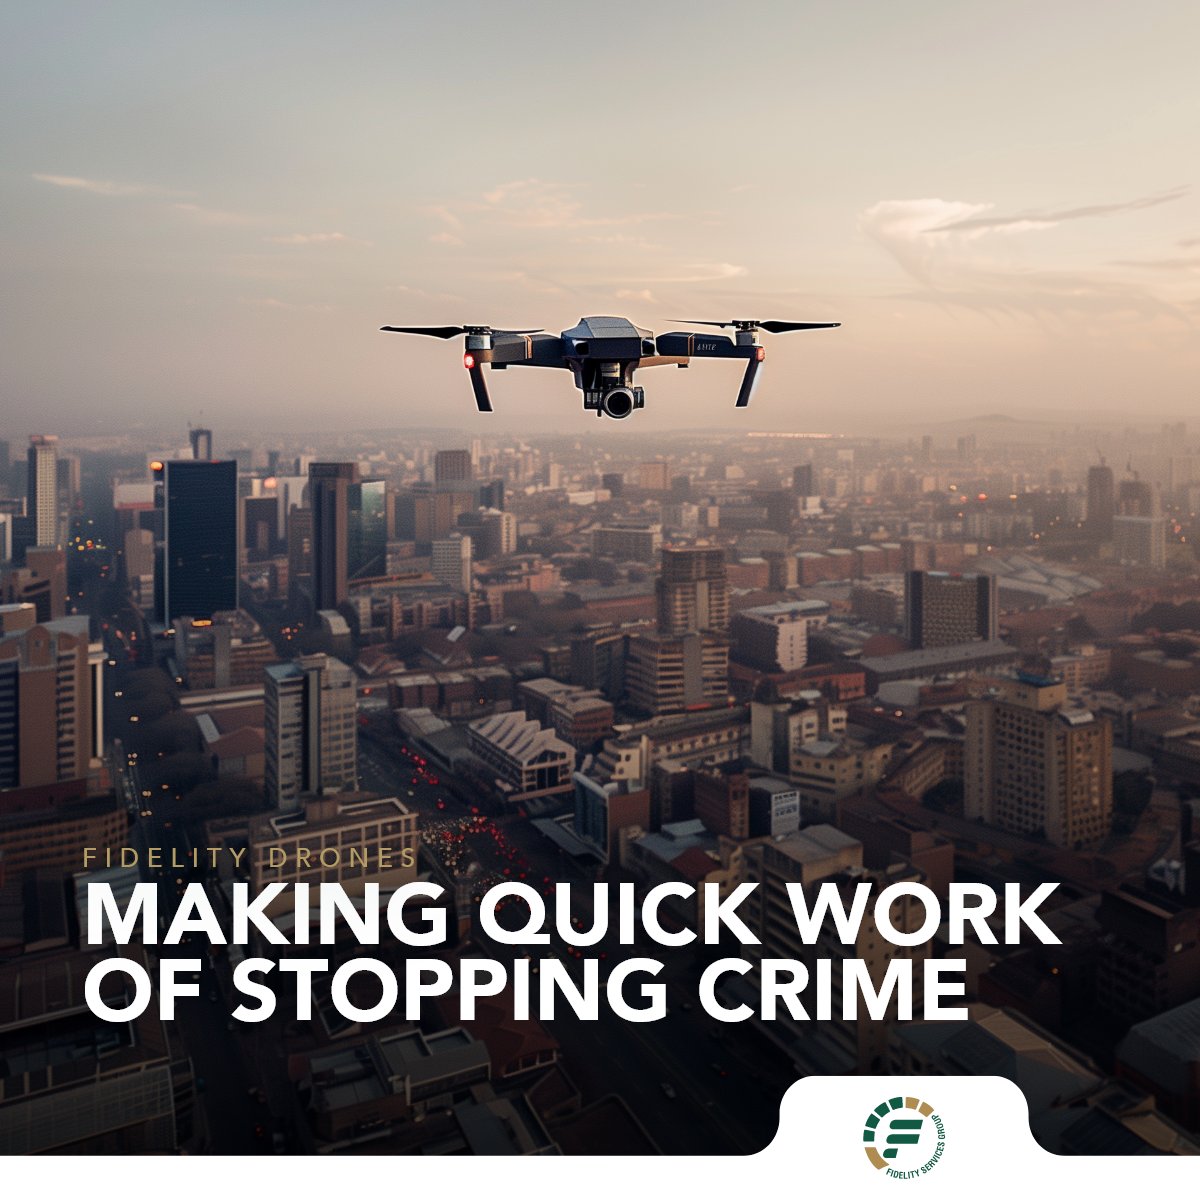 Since introducing our tactical drones, we’ve been able to track down and apprehend suspects faster than ever. 

#FidelityDrones #TacticalSecurity #AdvancedTech